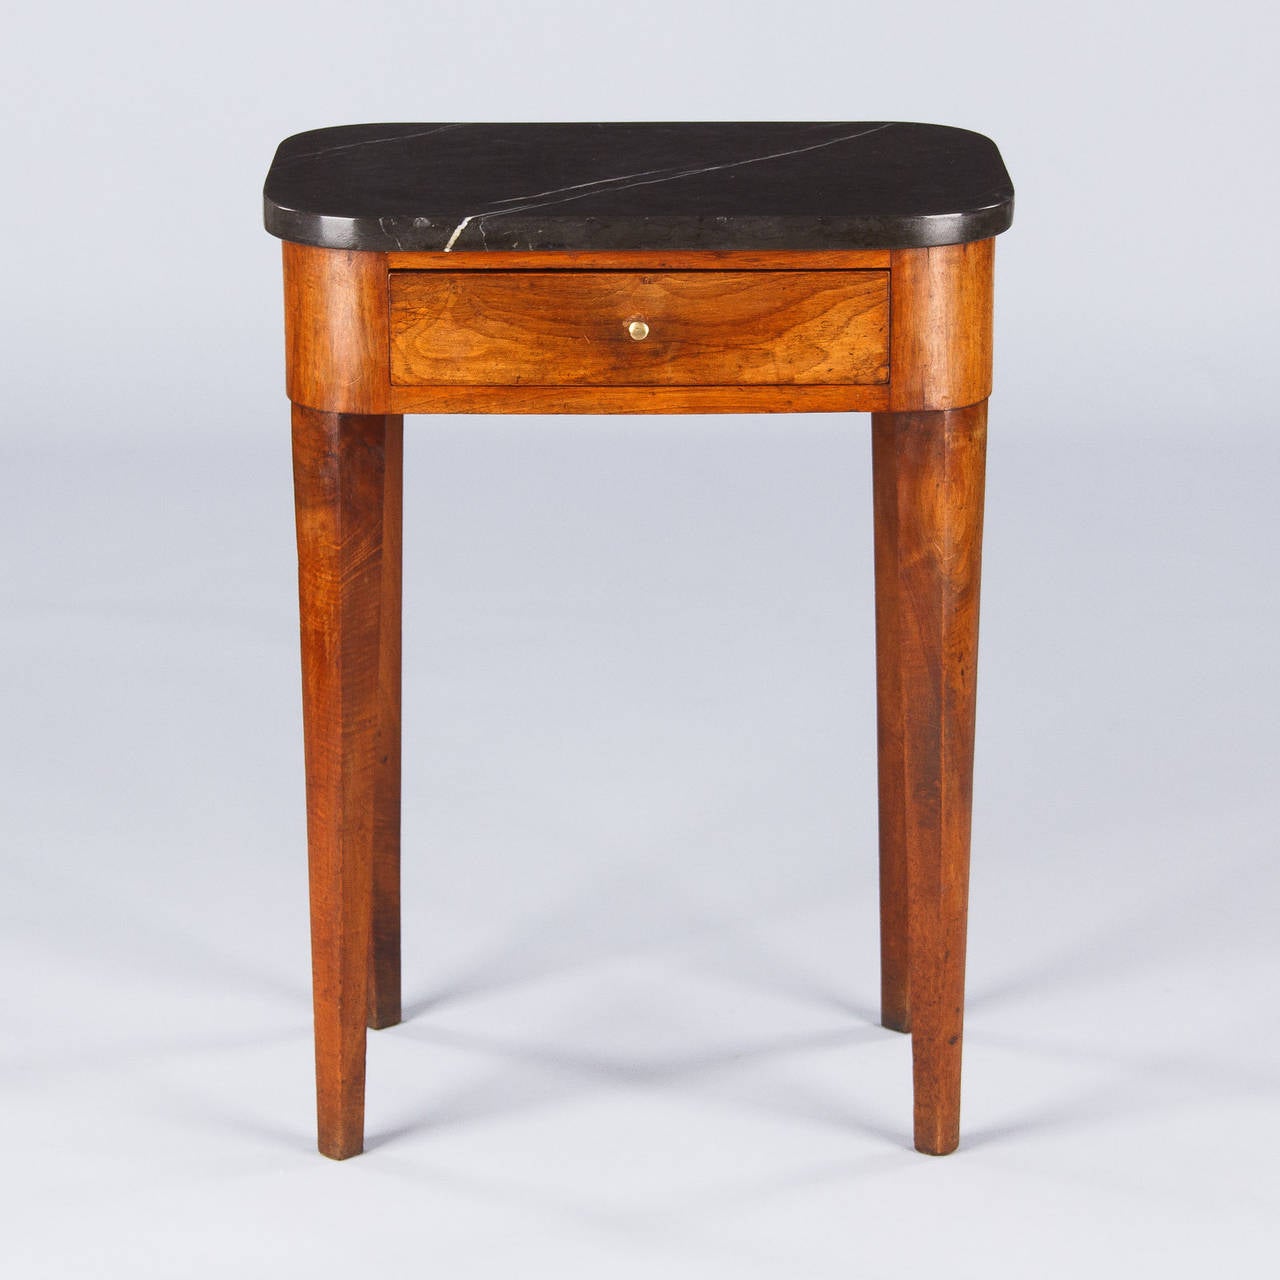 A petite Louis Philippe period side table purchased in Lyon. The walnut wood table features long tapered legs and the apron with rounded edges includes a drawer with a brass pull. The thick marble top is black with white veins.